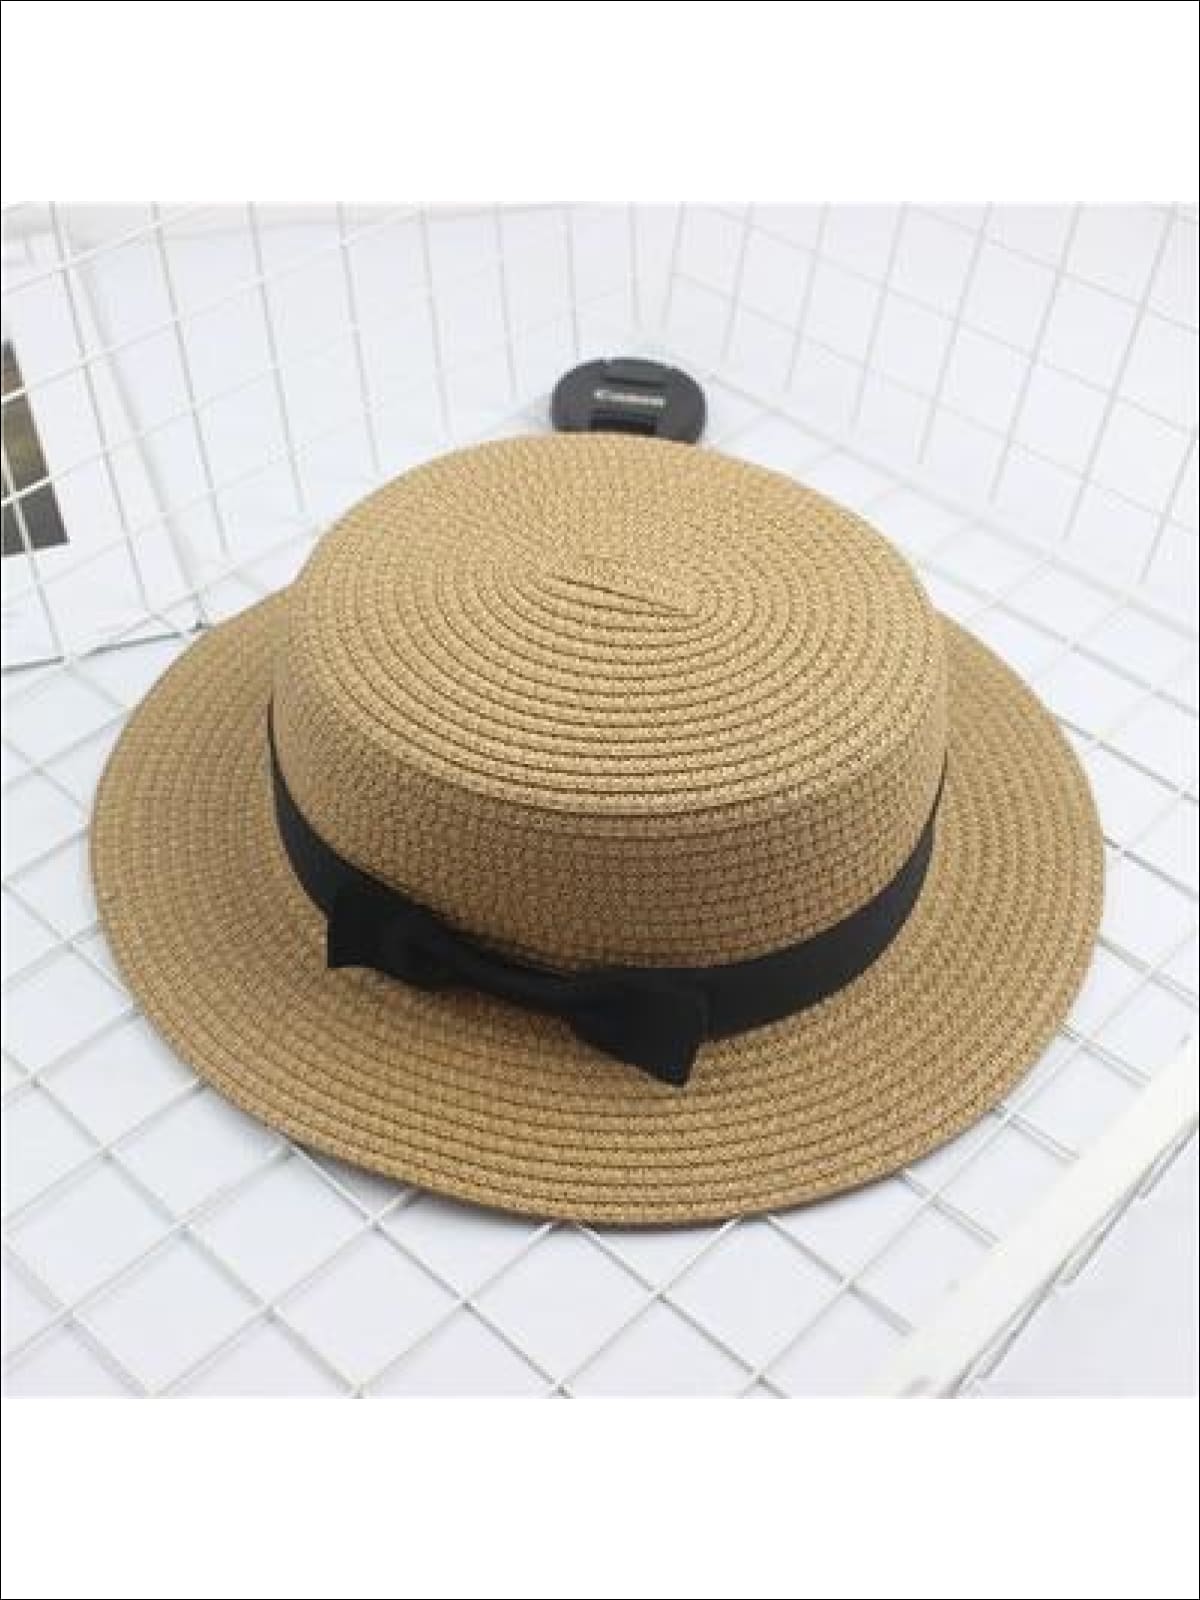 Girls Woven Straw Fedora Hat with Bow Tie (Multiple Color Options) - Beige / One Size - Girls Hats